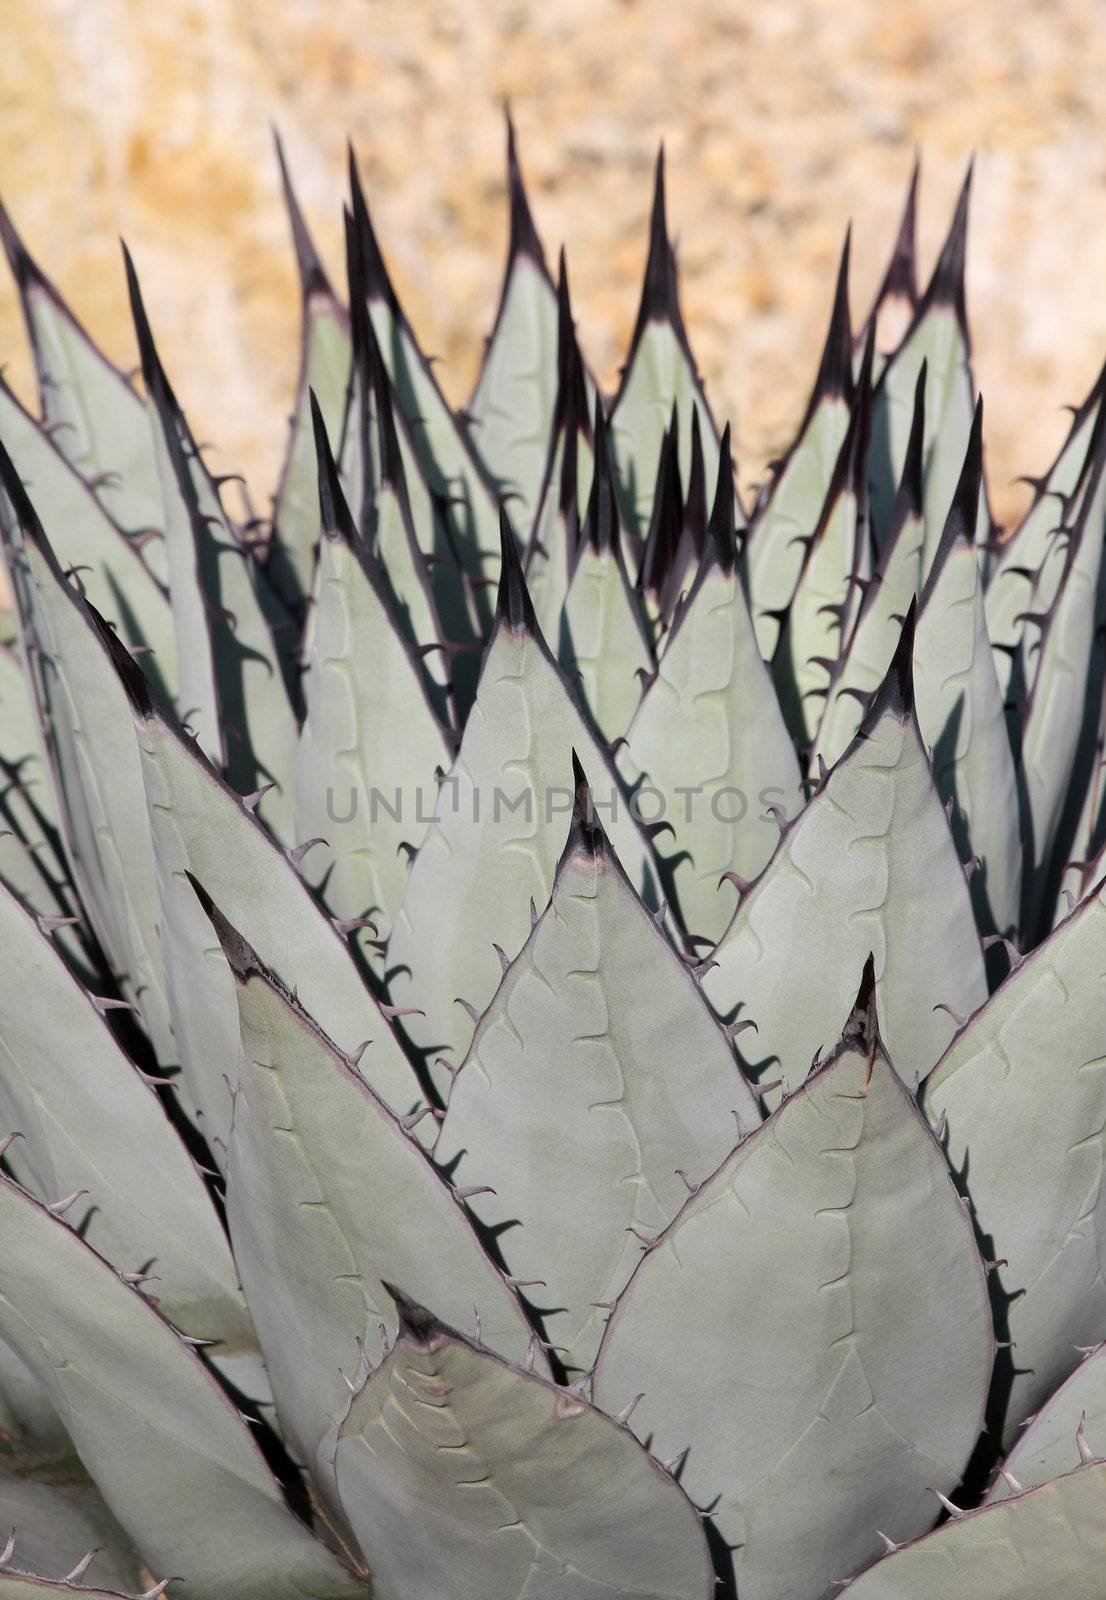 The pointed leafs of the cactus.